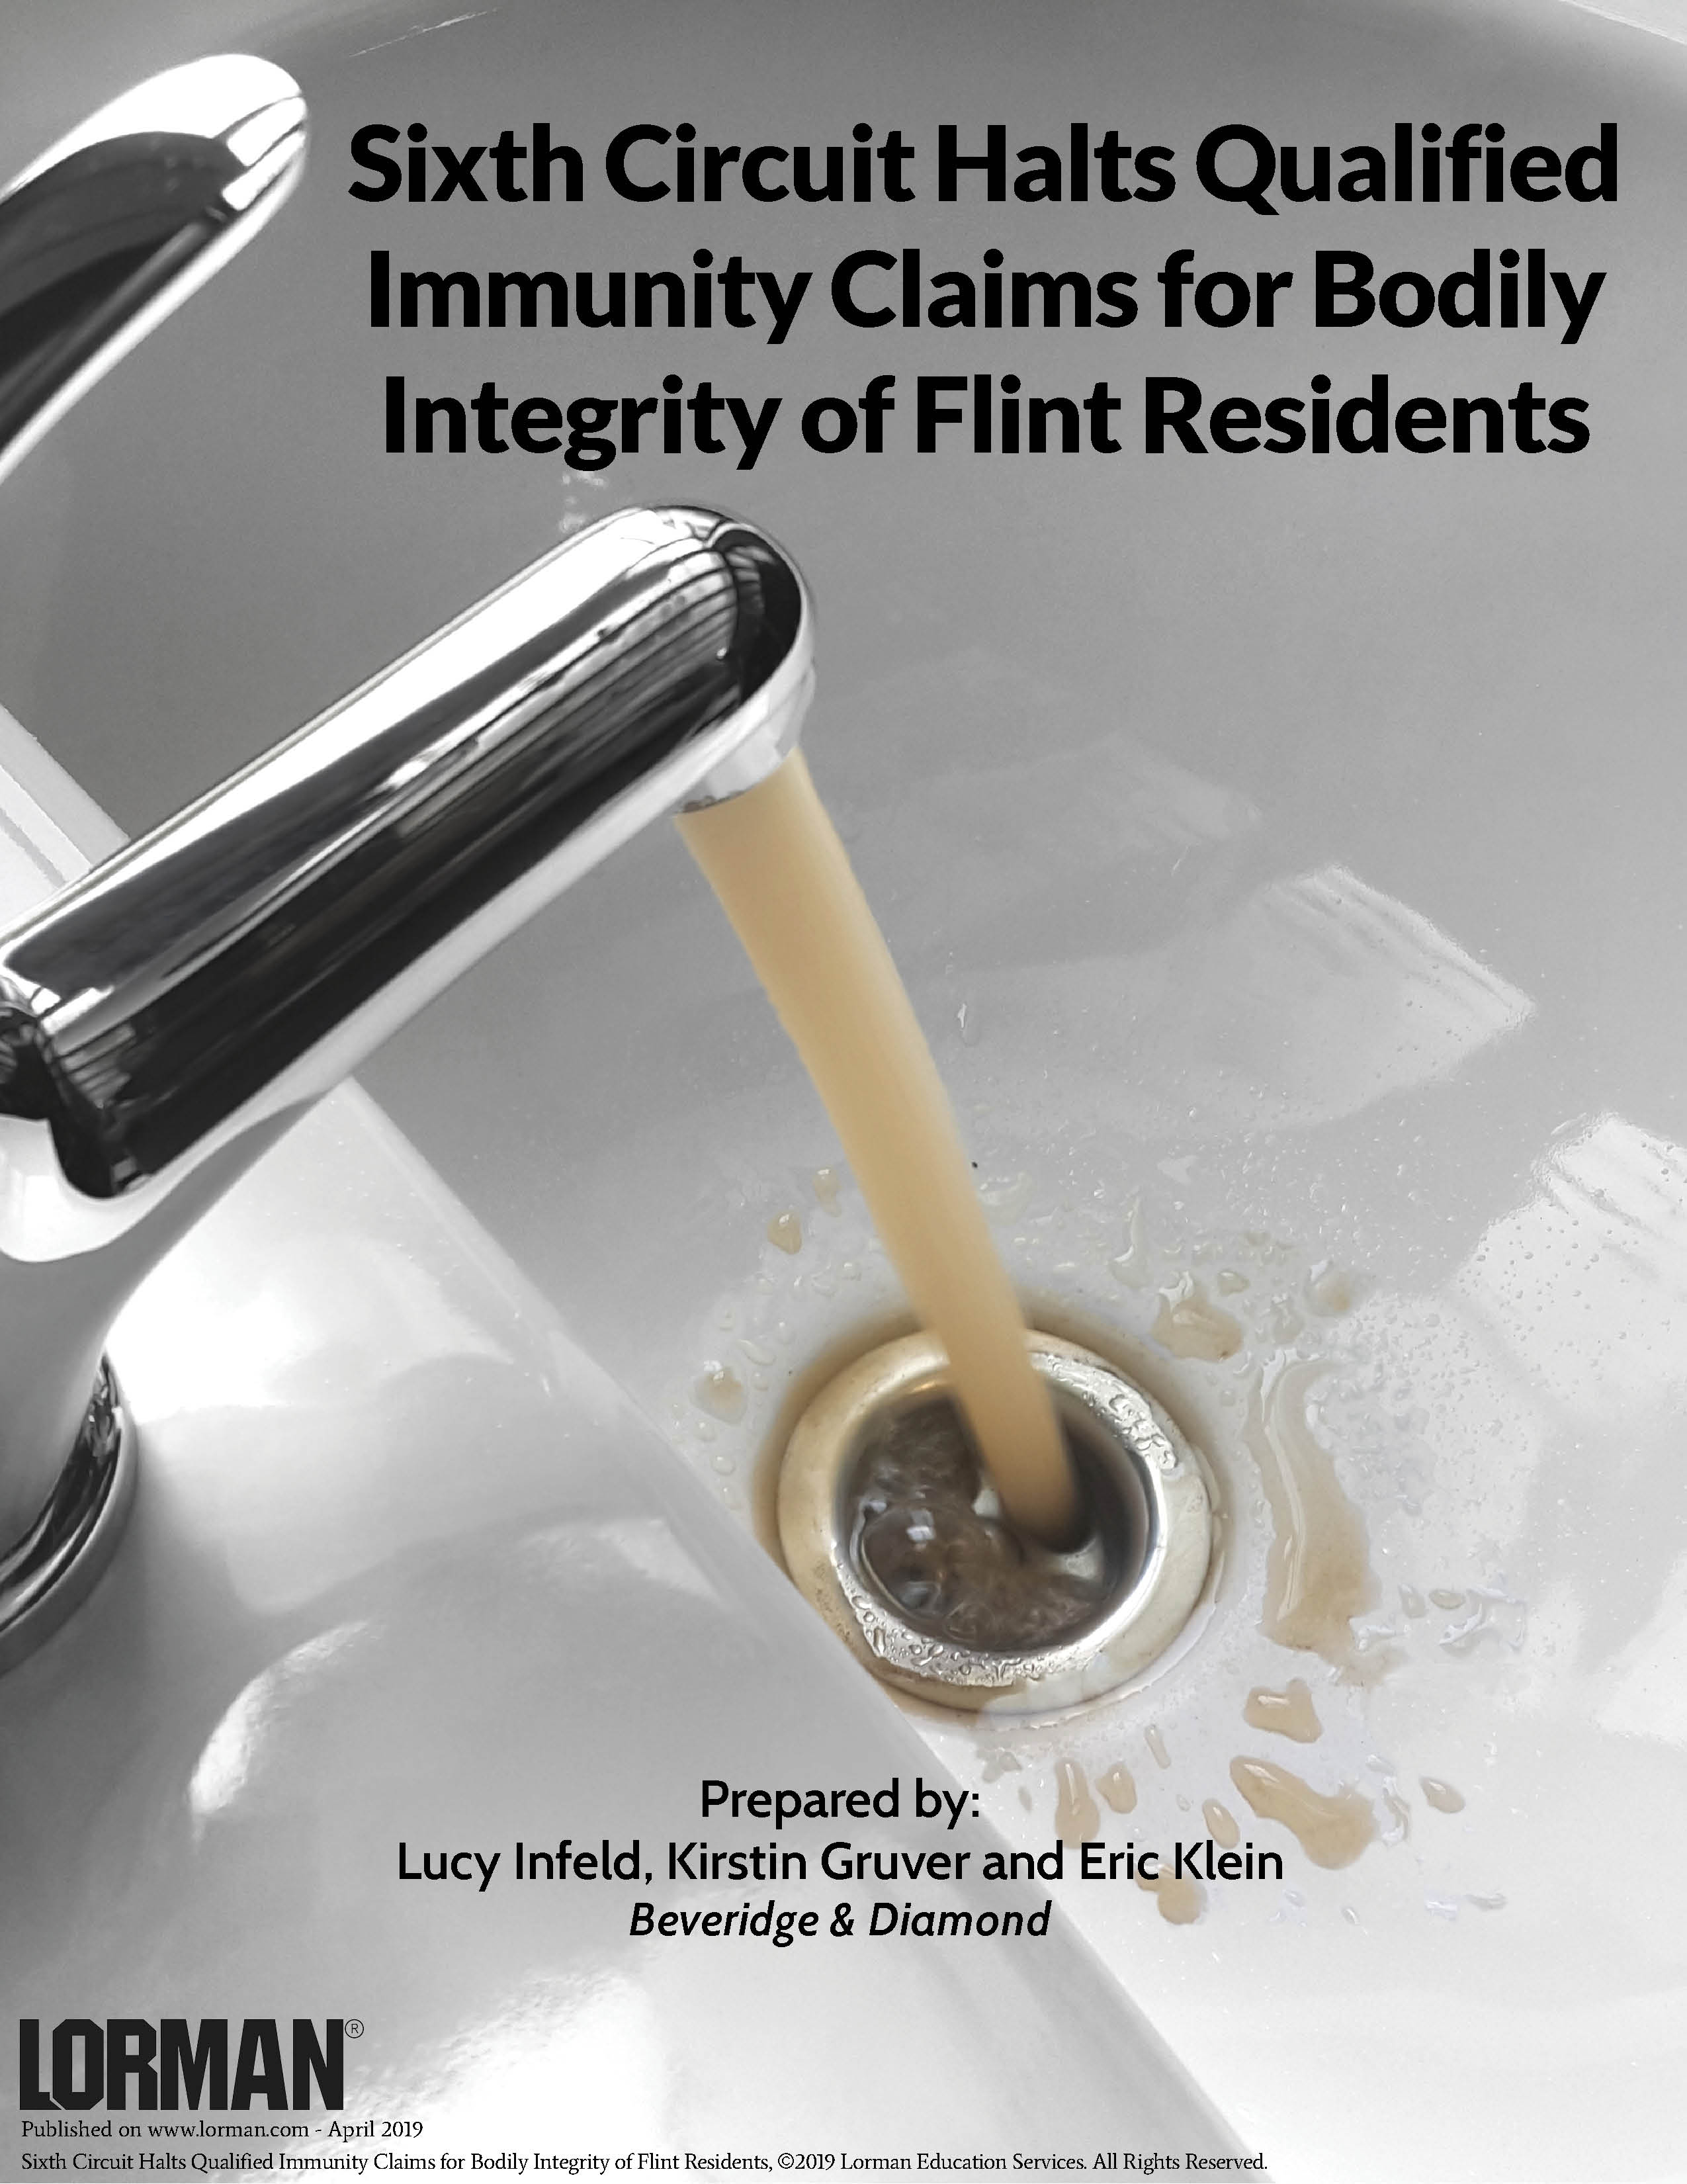 Sixth Circuit Halts Qualified Immunity Claims for Bodily Integrity of Flint Residents 